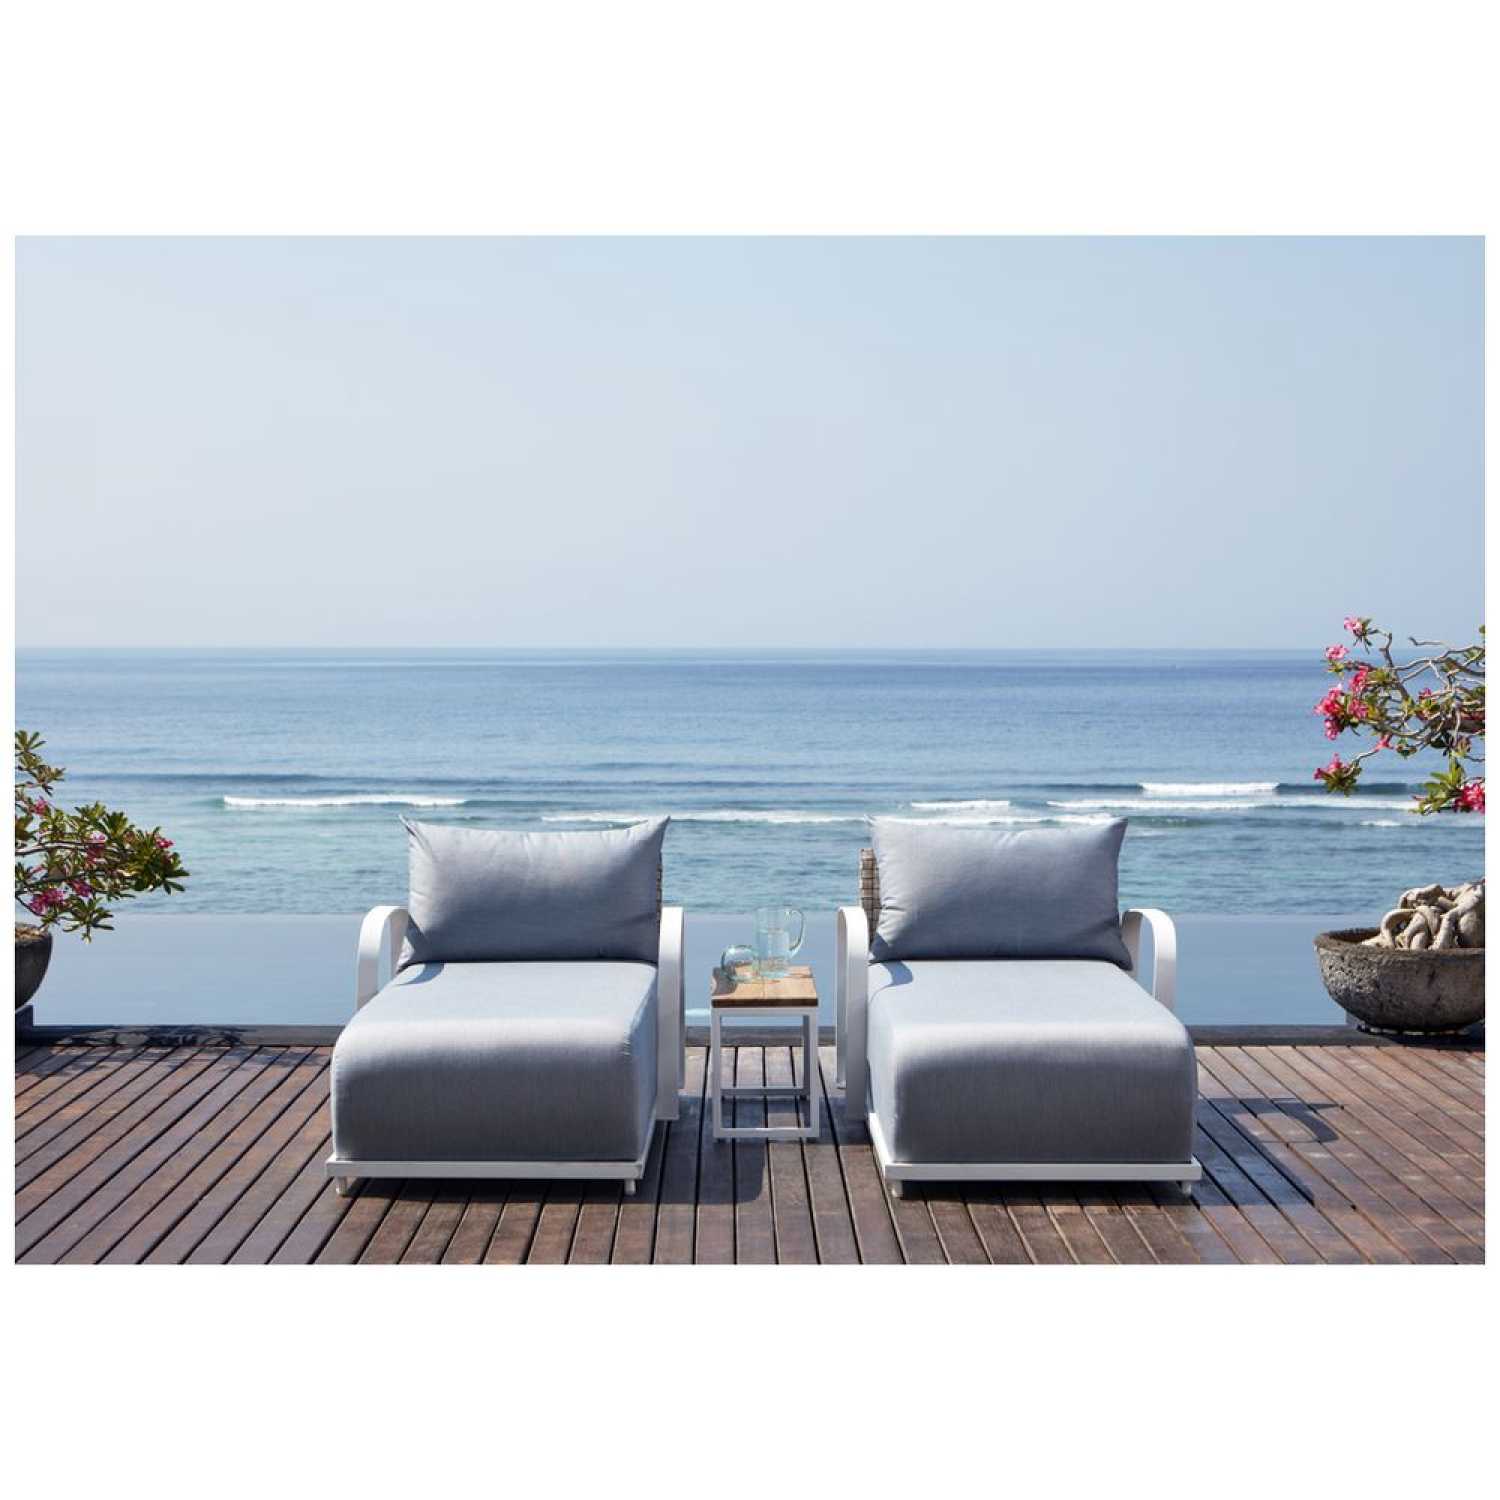 Windsor White Chaise with Nautic Square Side Table - PadioLiving - Windsor White Chaise with Nautic Square Side Table - Outdoor Chaise with Side Table - 1 Lounger with 1 Side table - PadioLiving